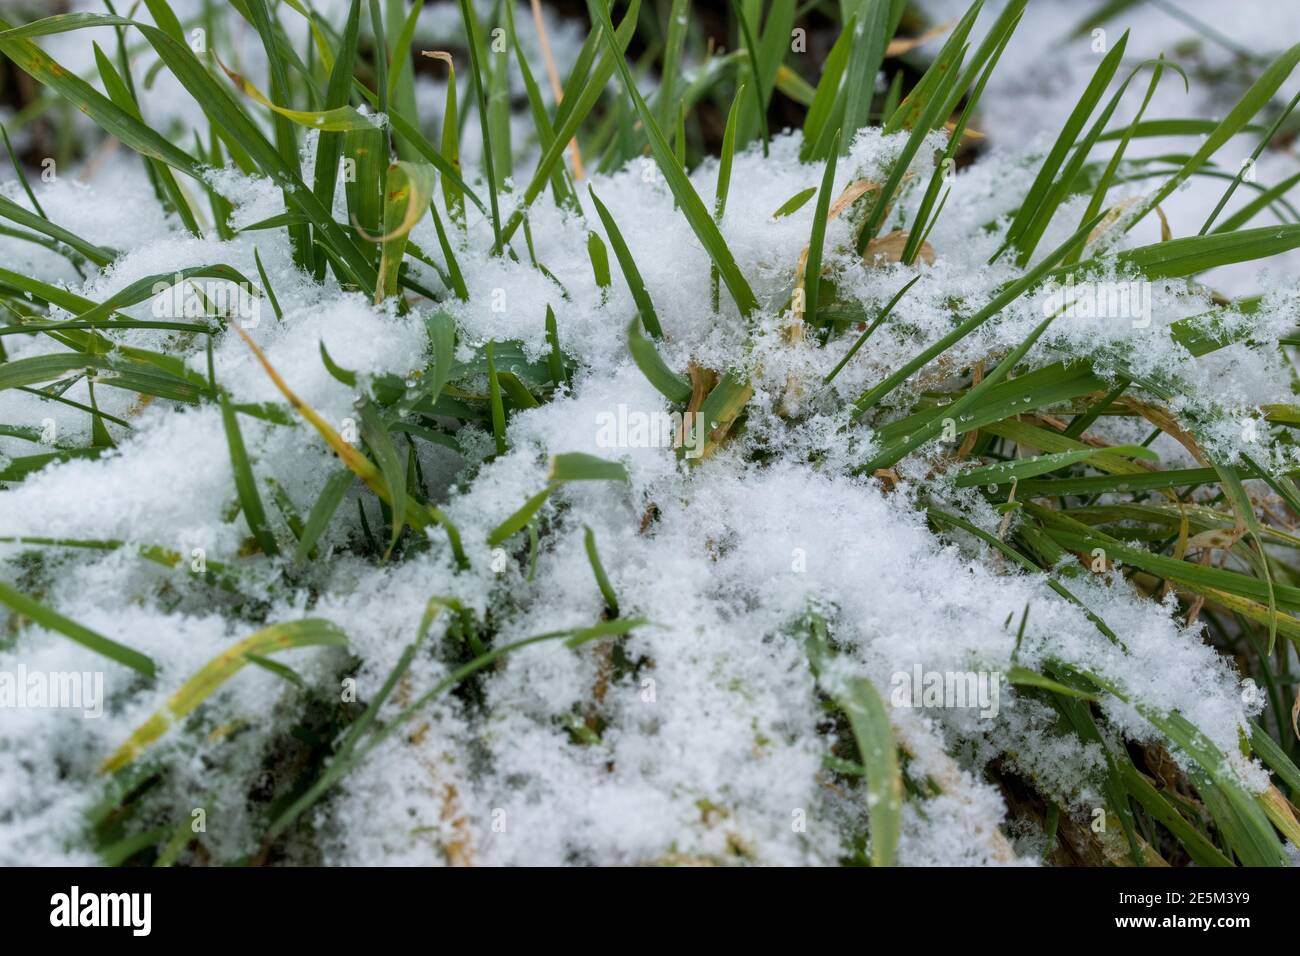 Tufts of grass and blades of grass covered with snow. Stock Photo